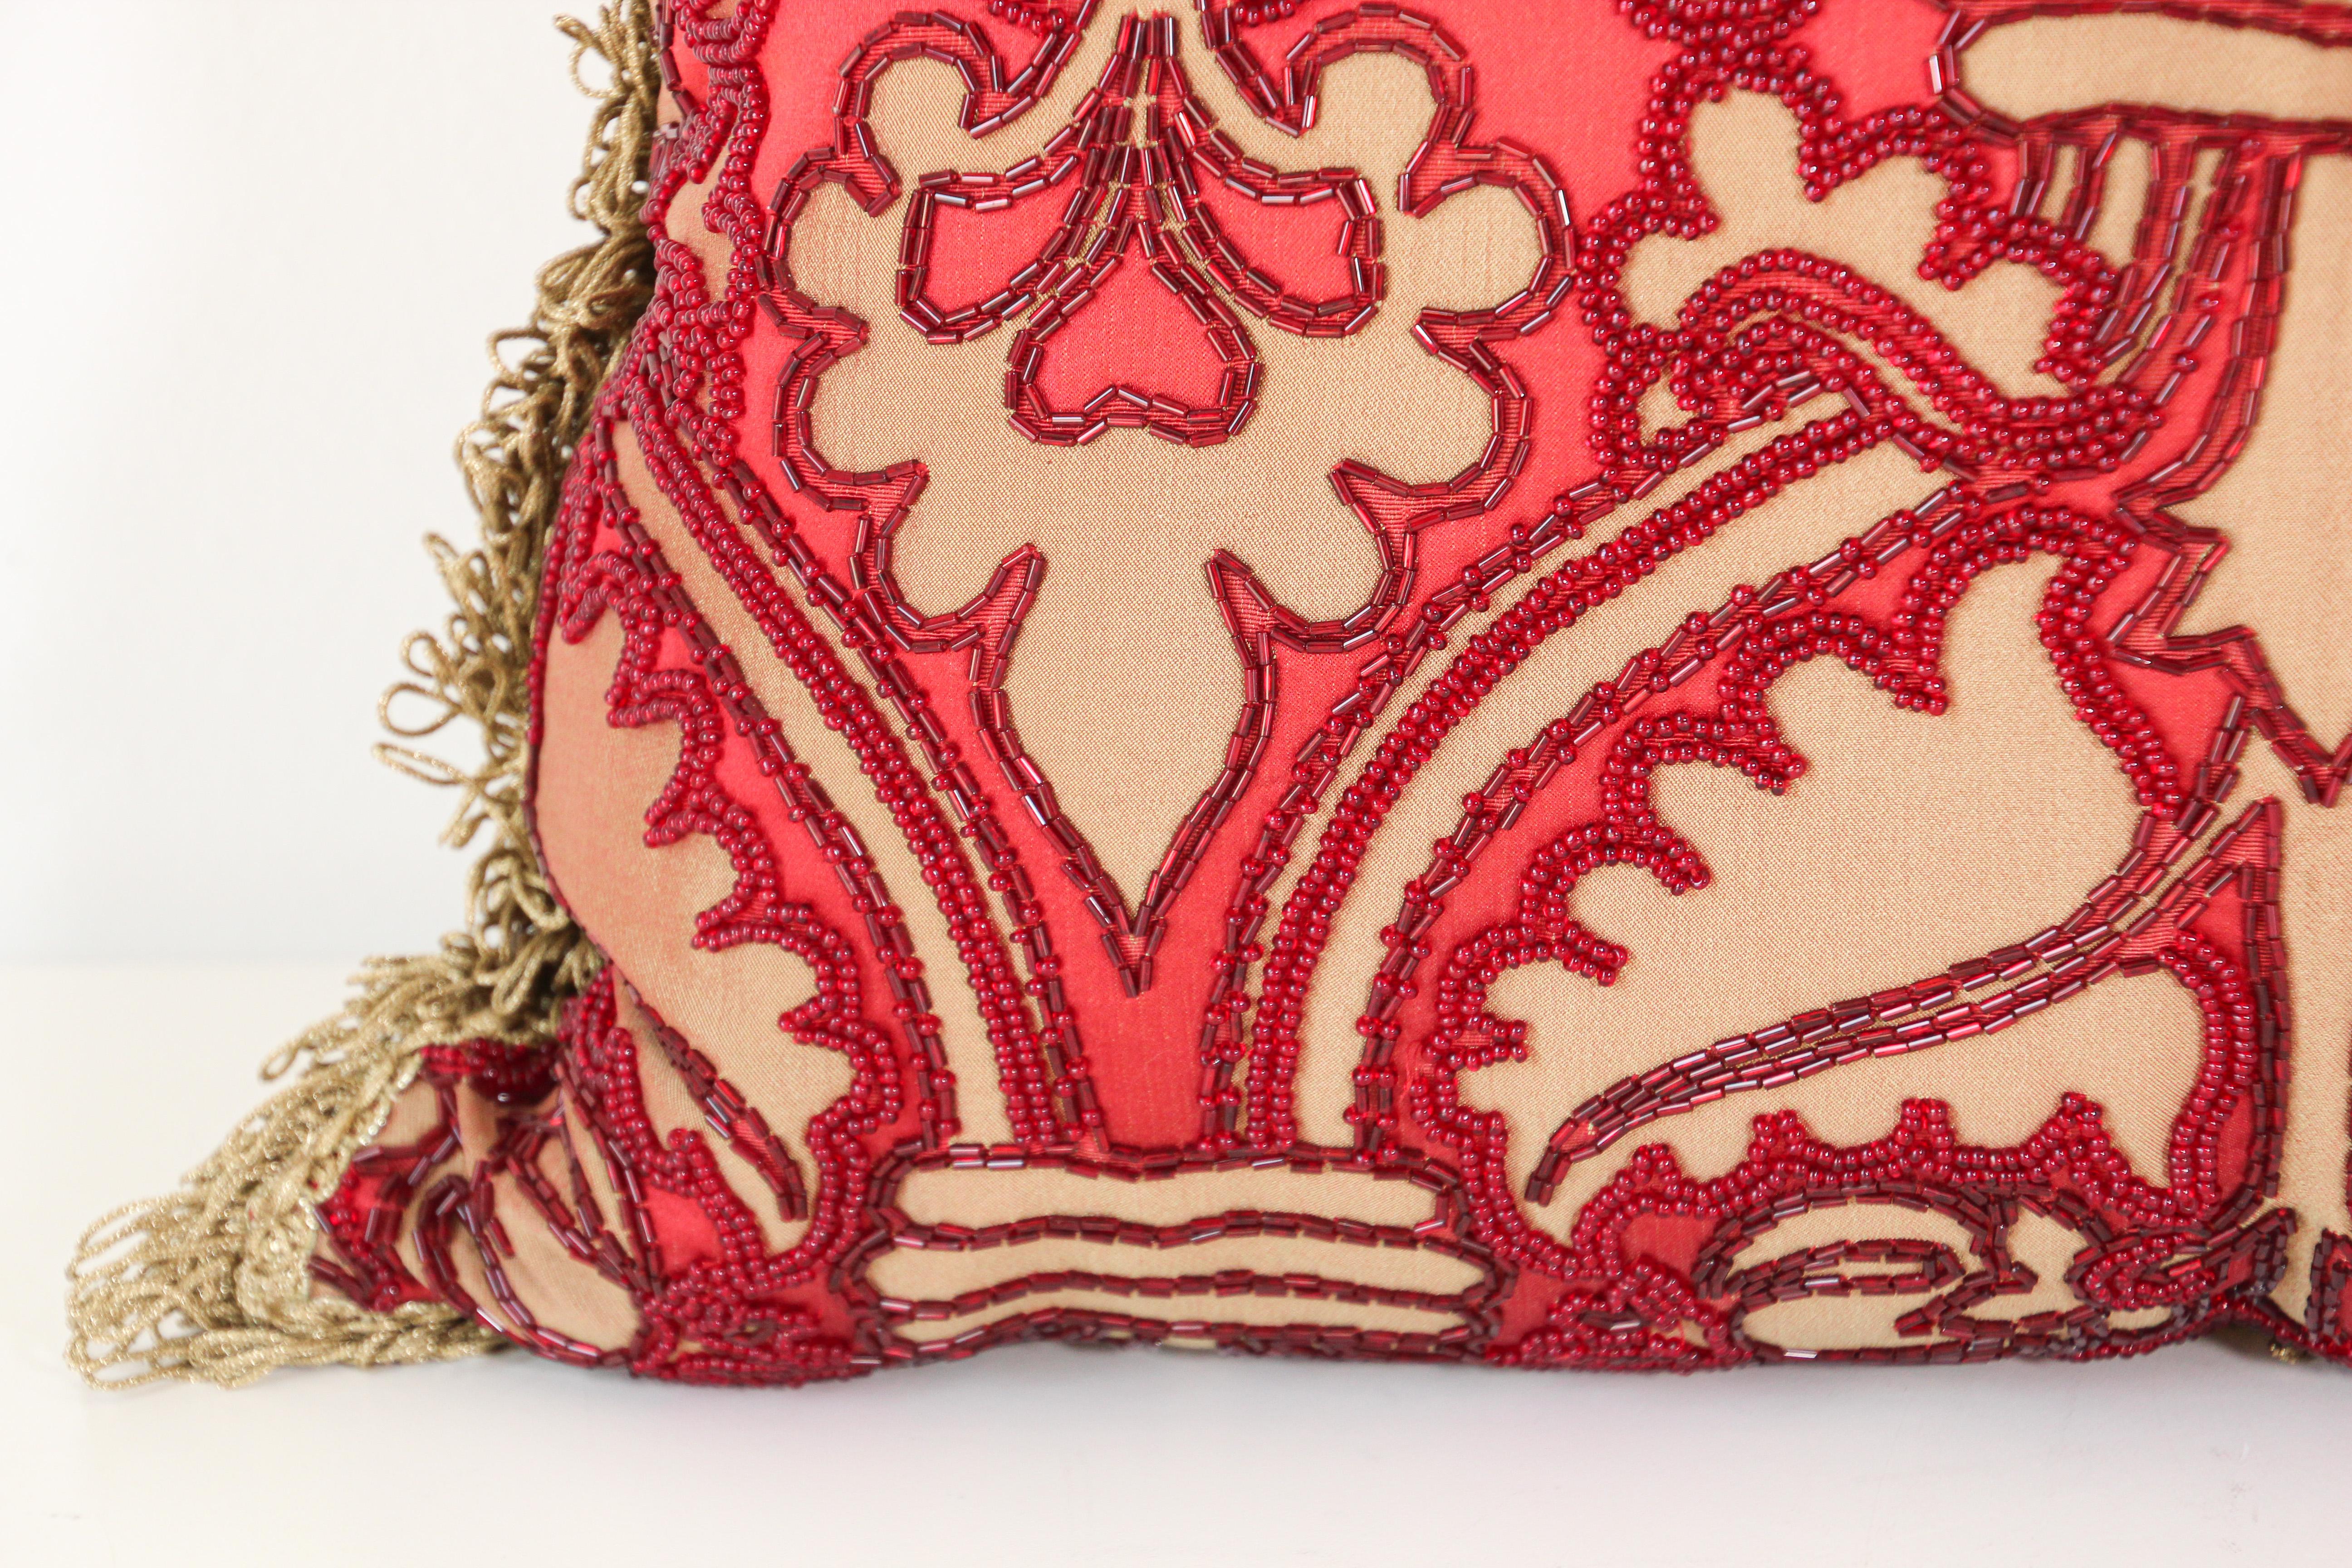 20th Century Large Silk Pillow with Metallic Red Beads